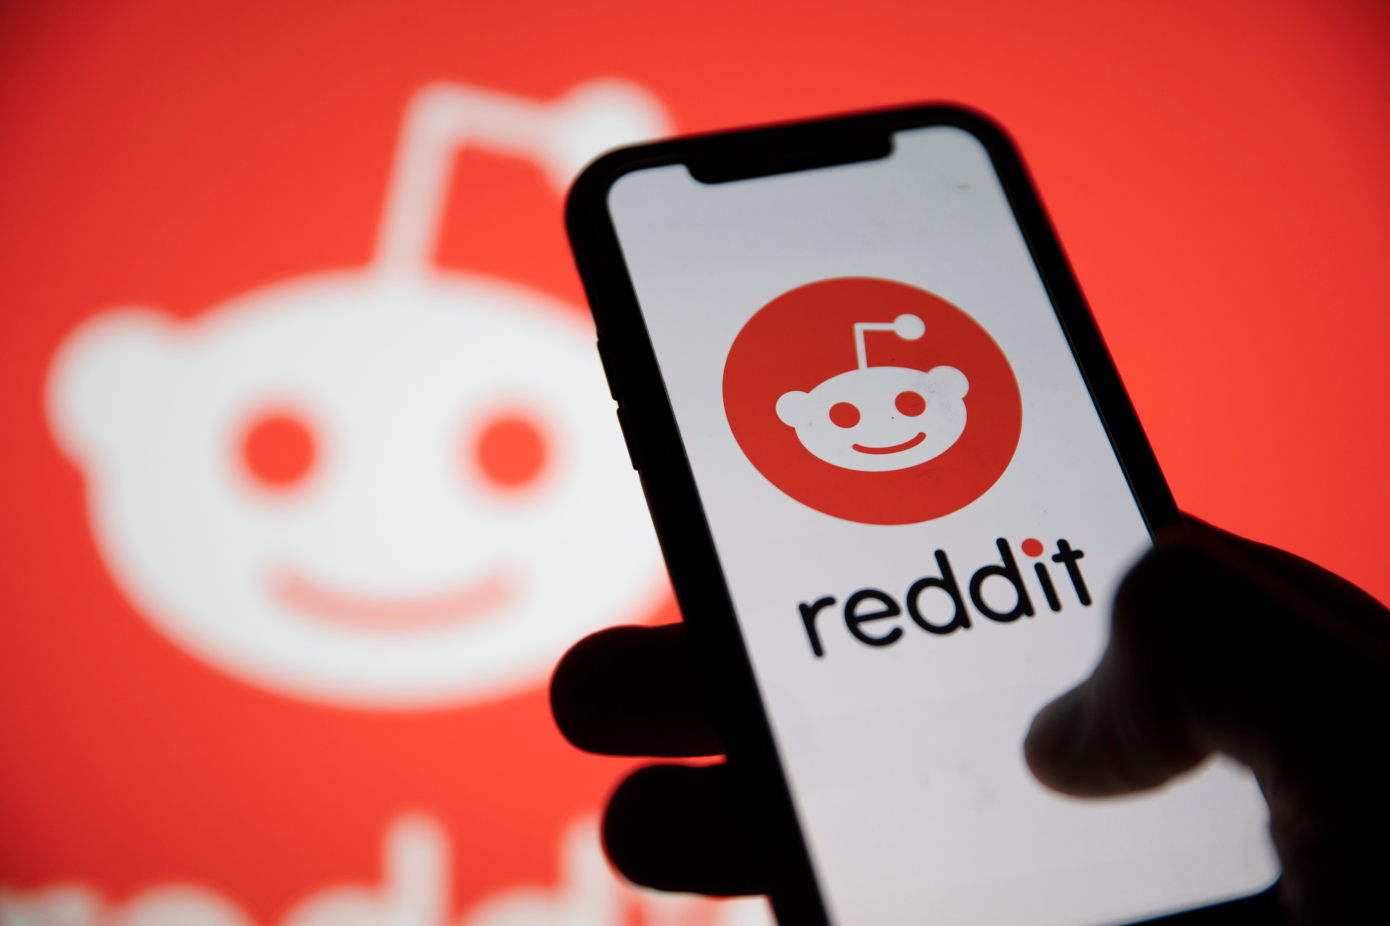 Google and Reddit Expand Partnership to Enhance Search Capabilities